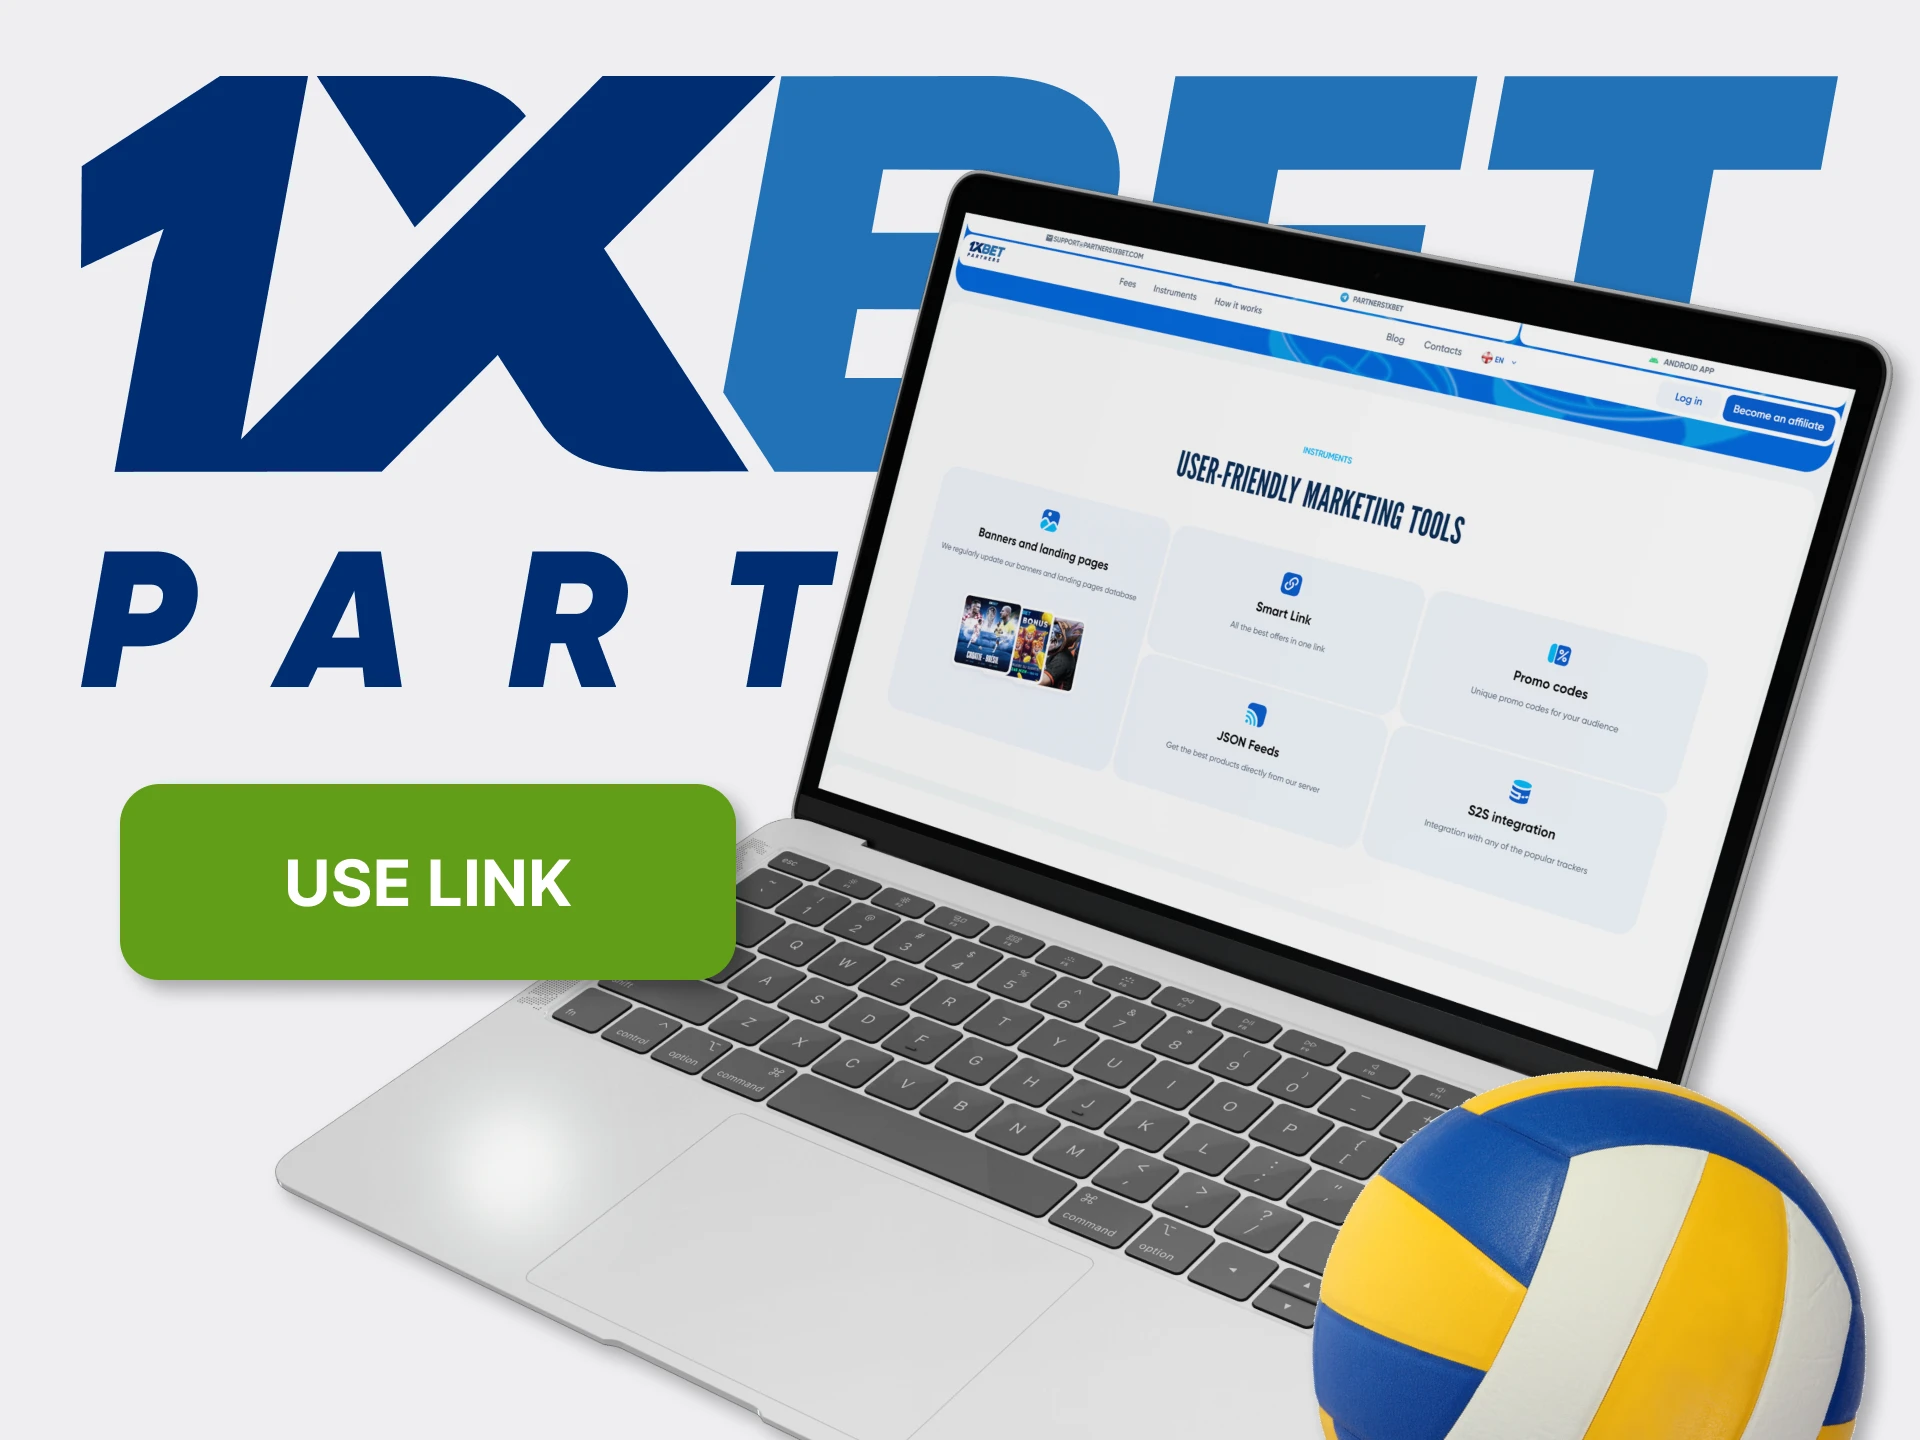 Use a referral link to promote 1xBet.